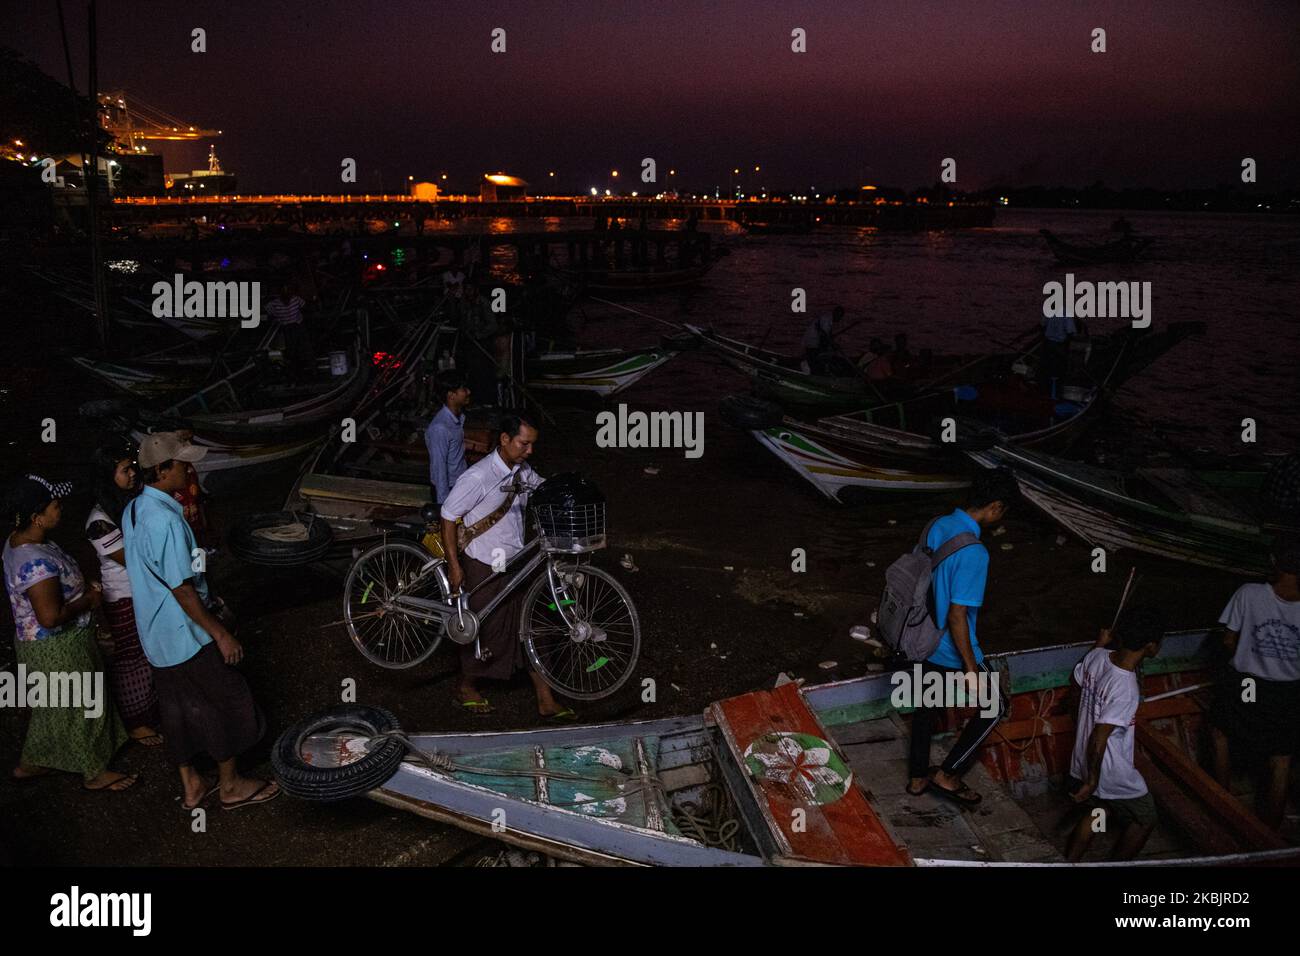 A man carries his bicycle on a ferry at a jetty in Yangon, Myanmar on March 10, 2020. (Photo by Shwe Paw Mya Tin/NurPhoto) Stock Photo